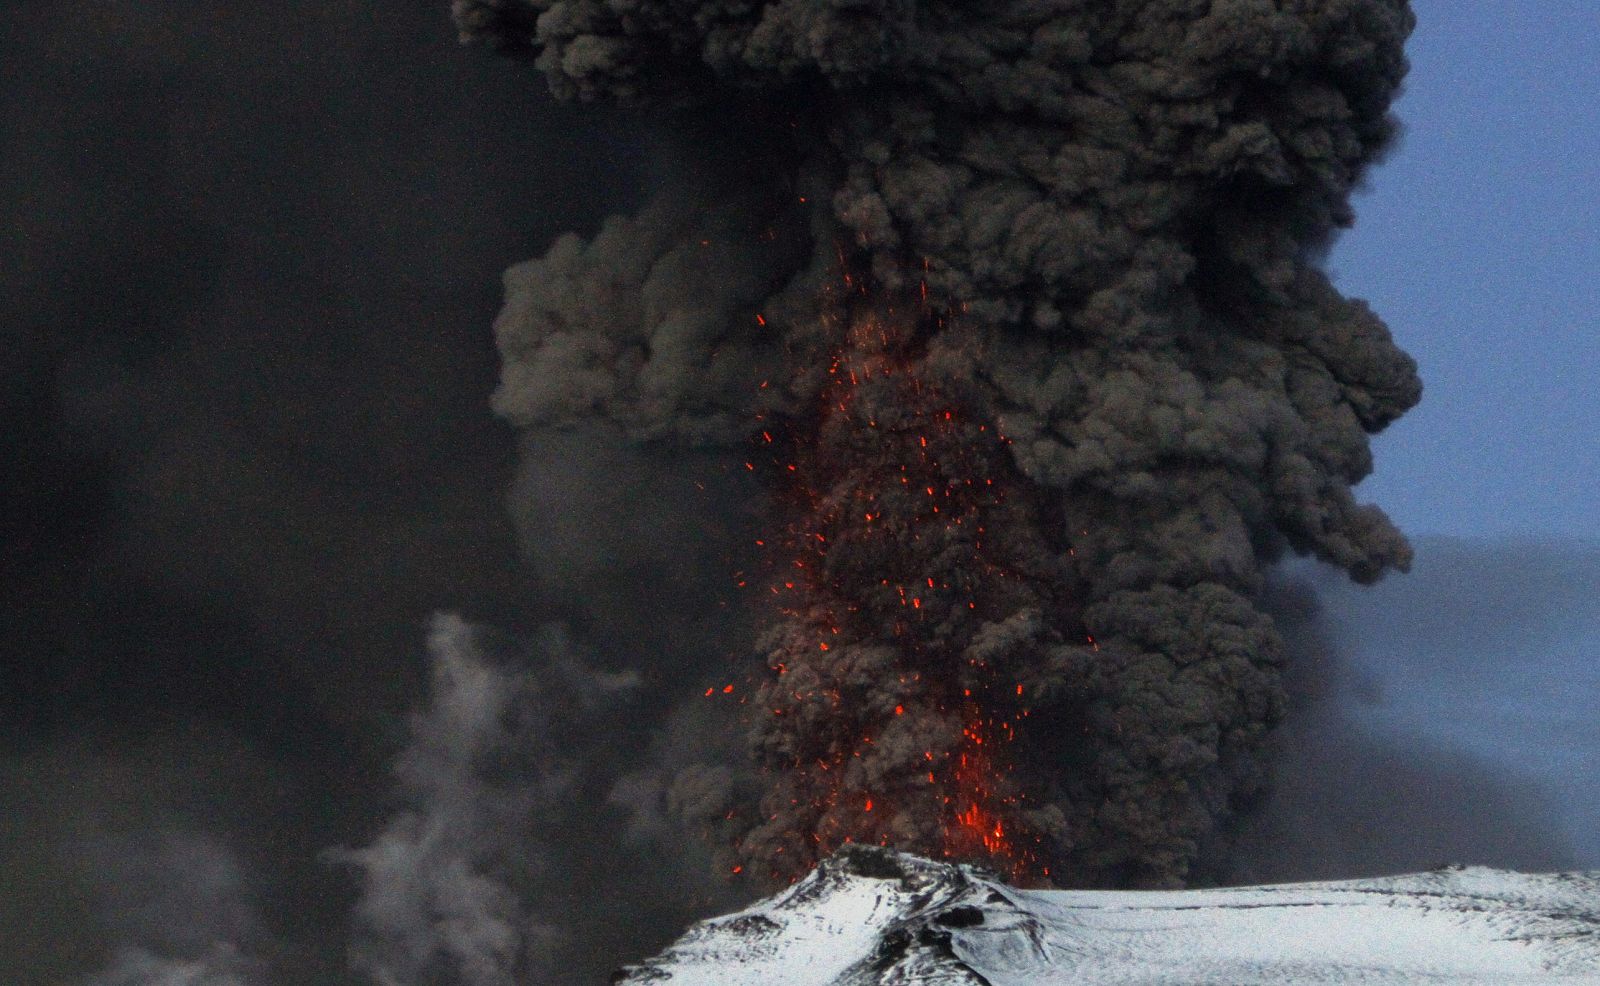 A fresh cloud of ash and lava eruptions are seen in the volcano under the Eyjafjallajokull glacier in Iceland